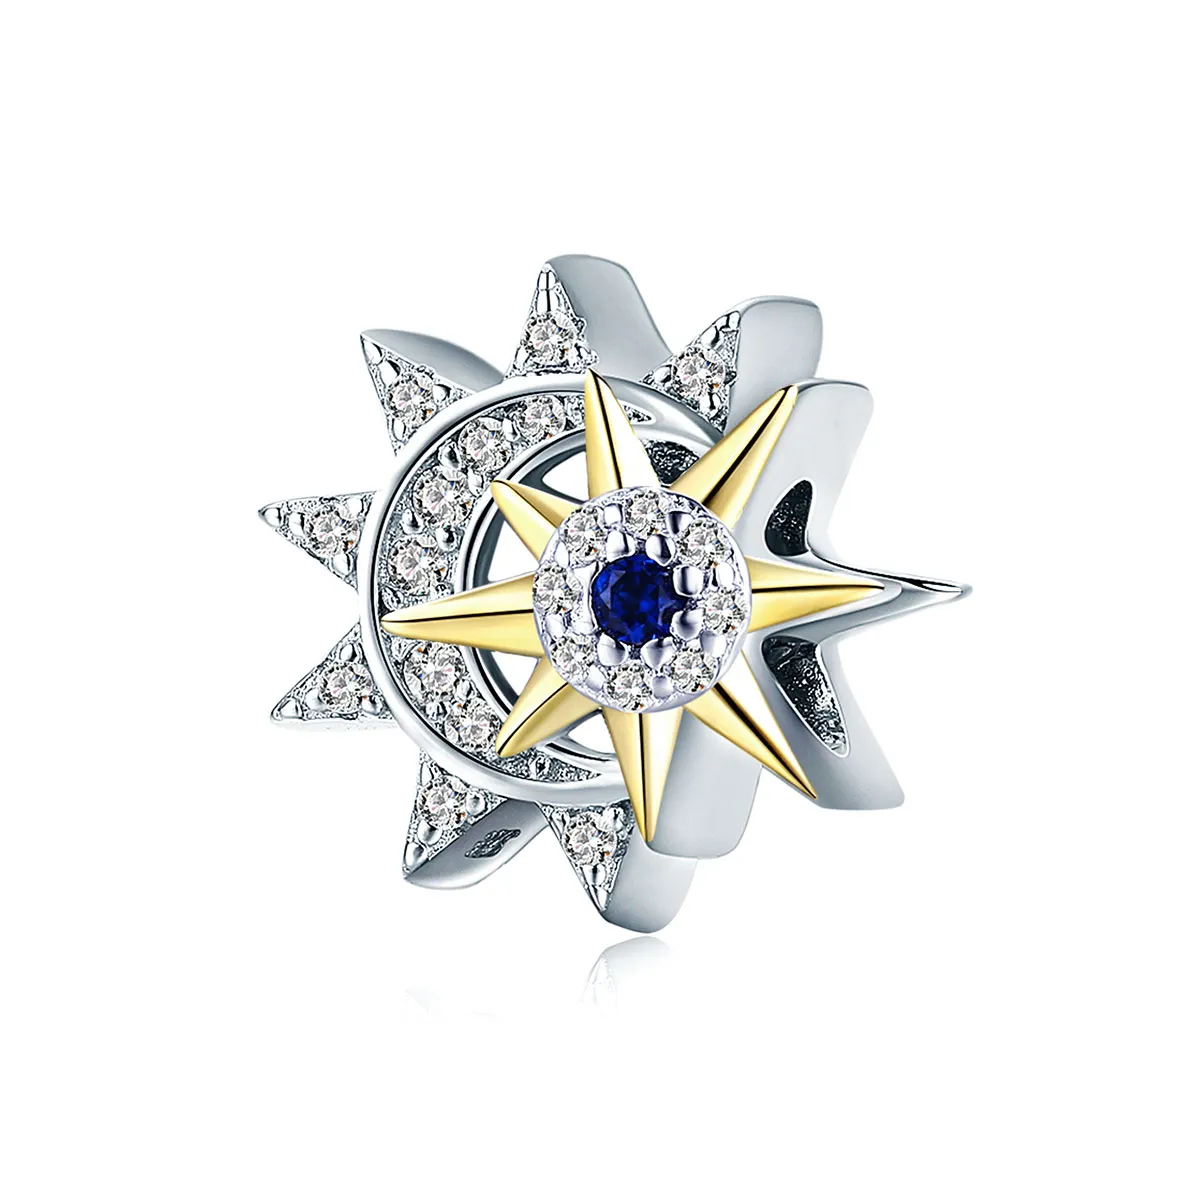 Pandora Style Silver & Gold-Plated Sun Meets Moon Charm - SCC1137